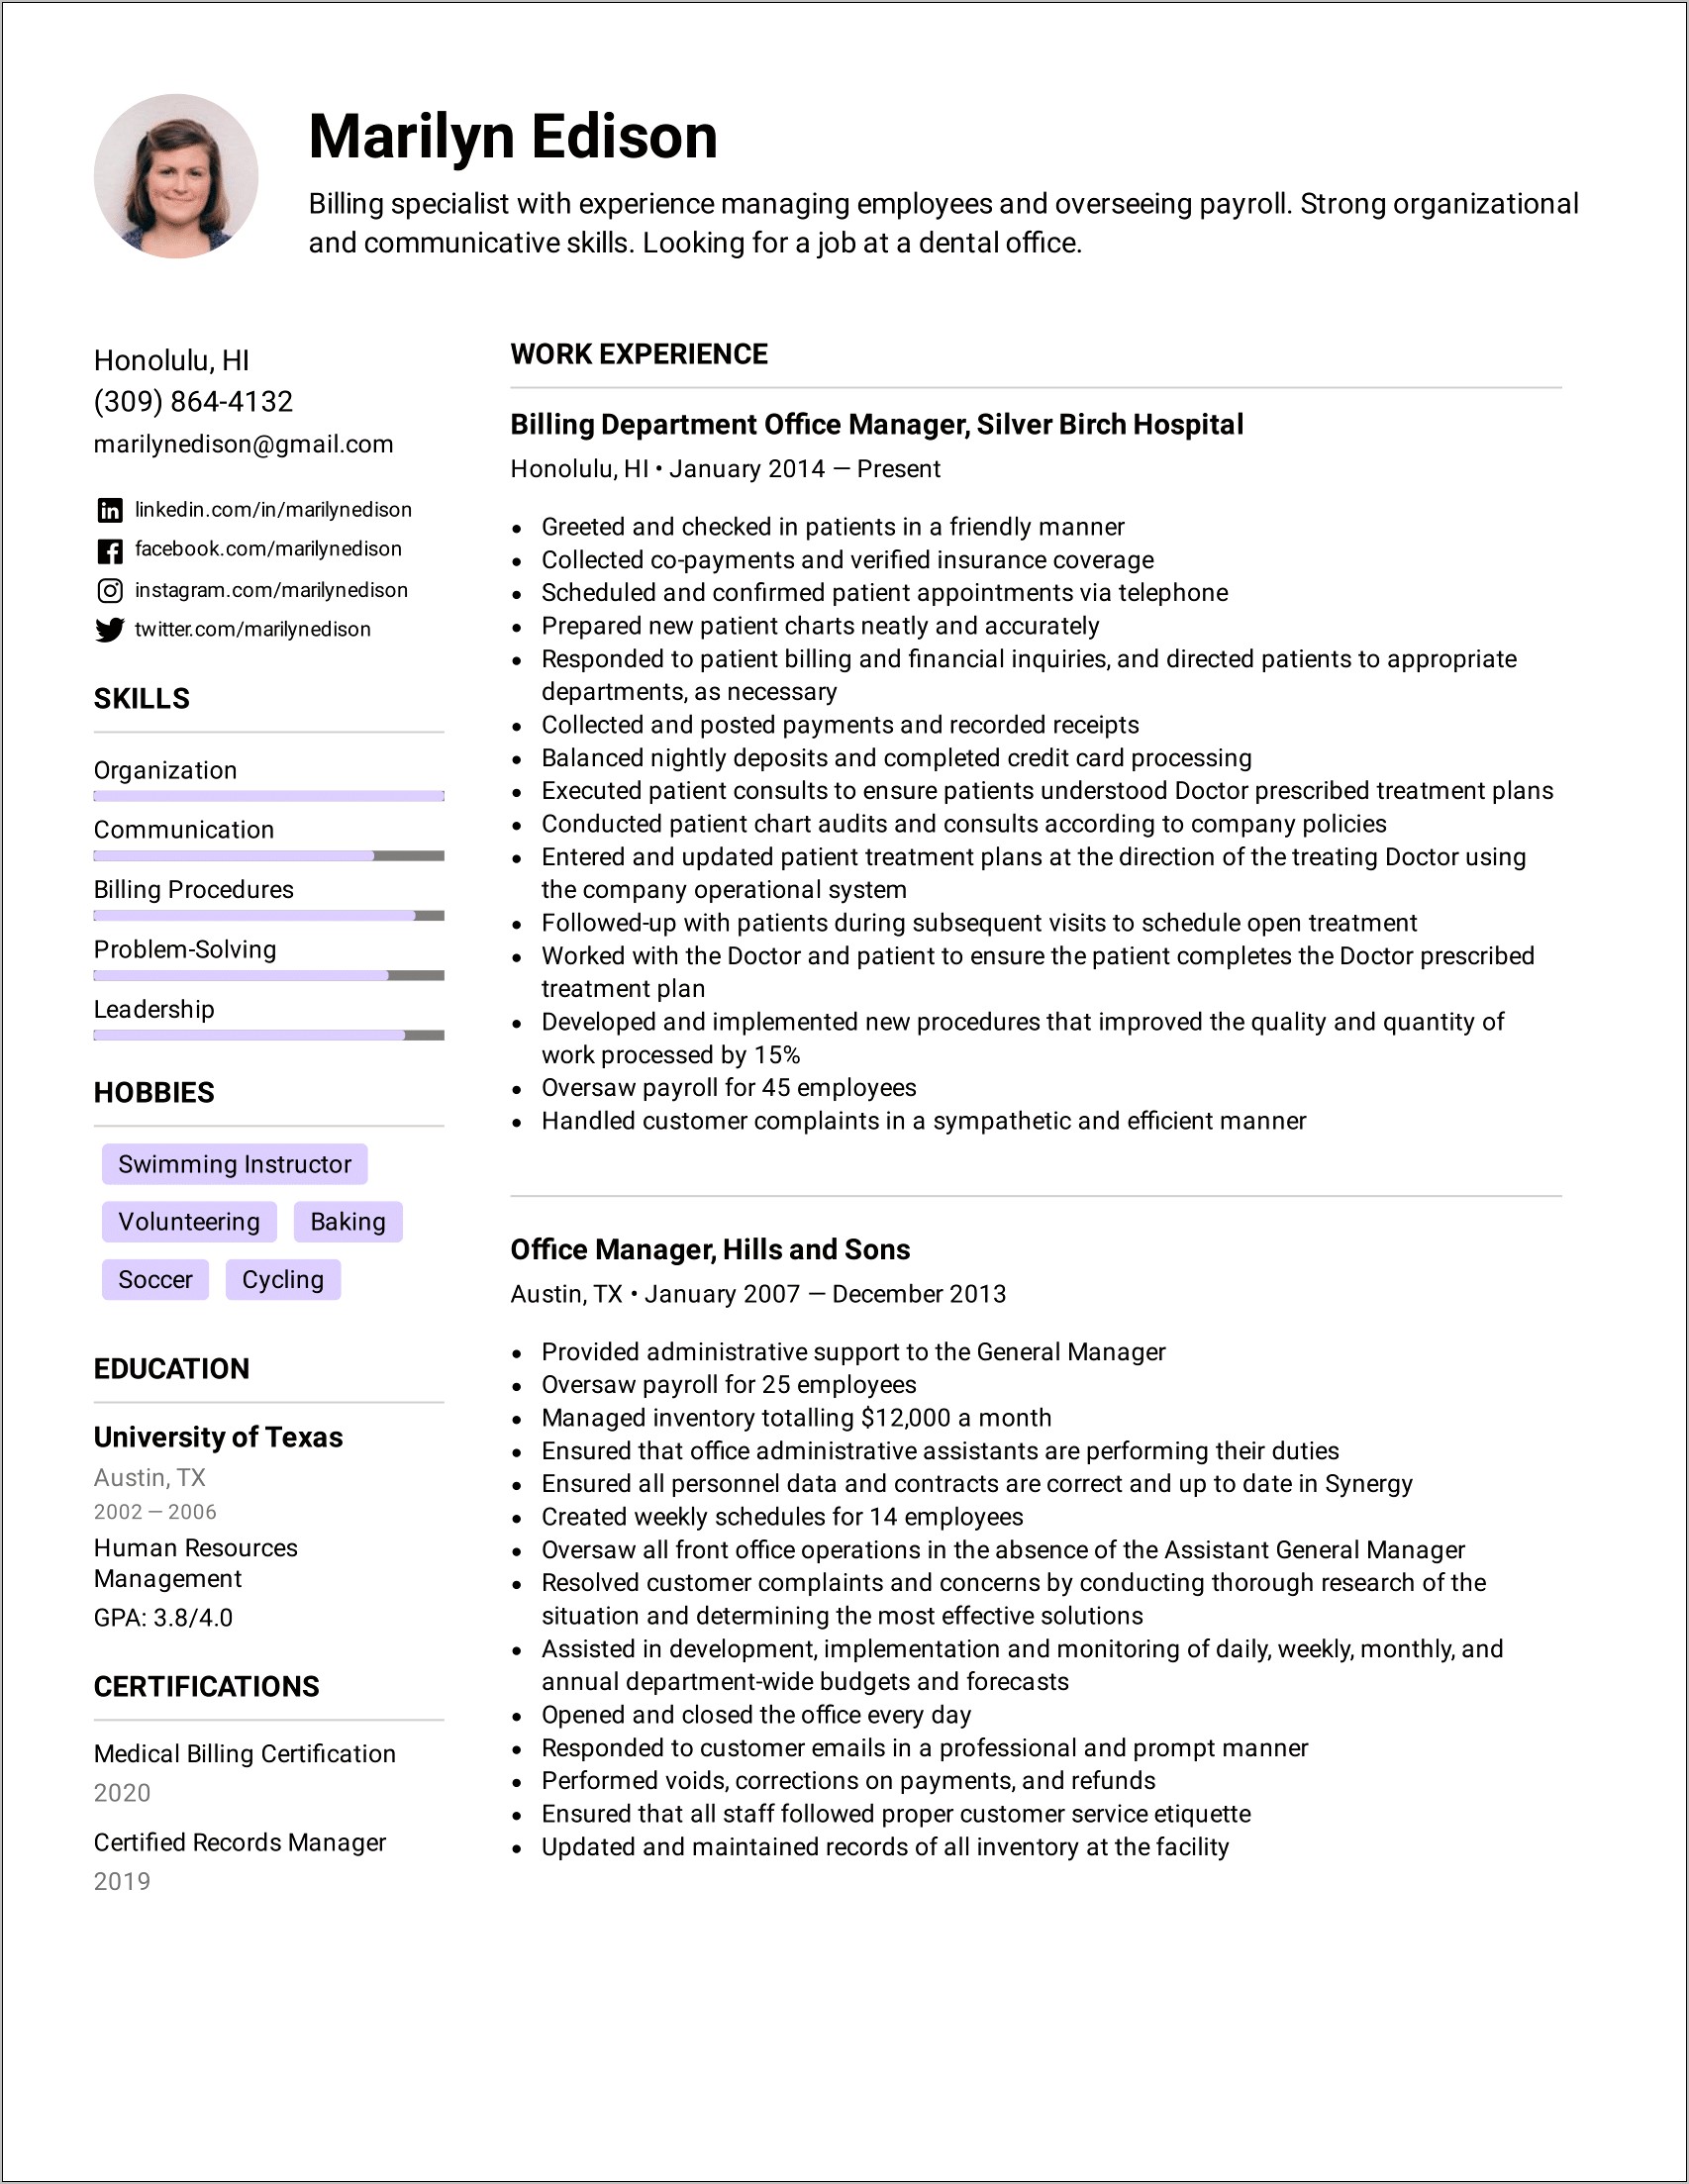 Professional Summary Resume Examples For Office Manager